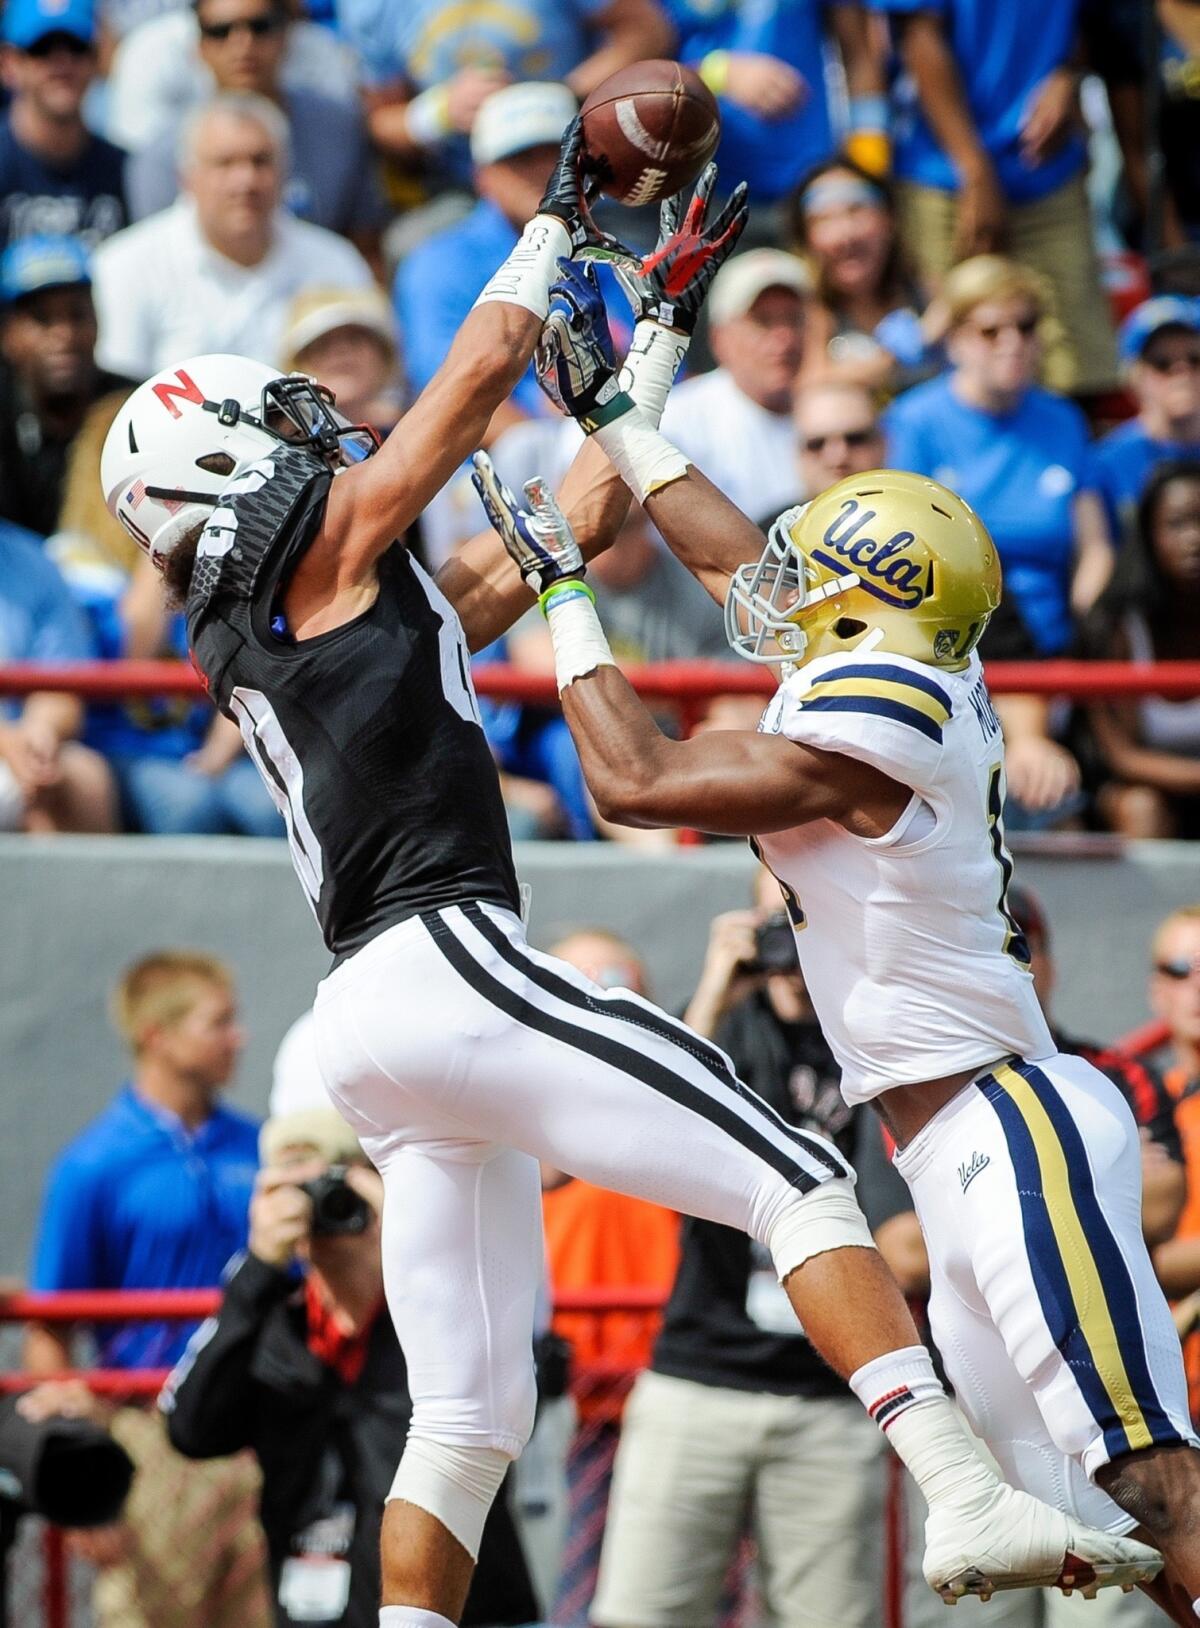 UCLA cornerback Fabian Moreau, right, can't stop Nebraska wide receiver Kenny Bell from catching a touchdown pass during the first half of the Bruins' 41-21 comeback victory Saturday.